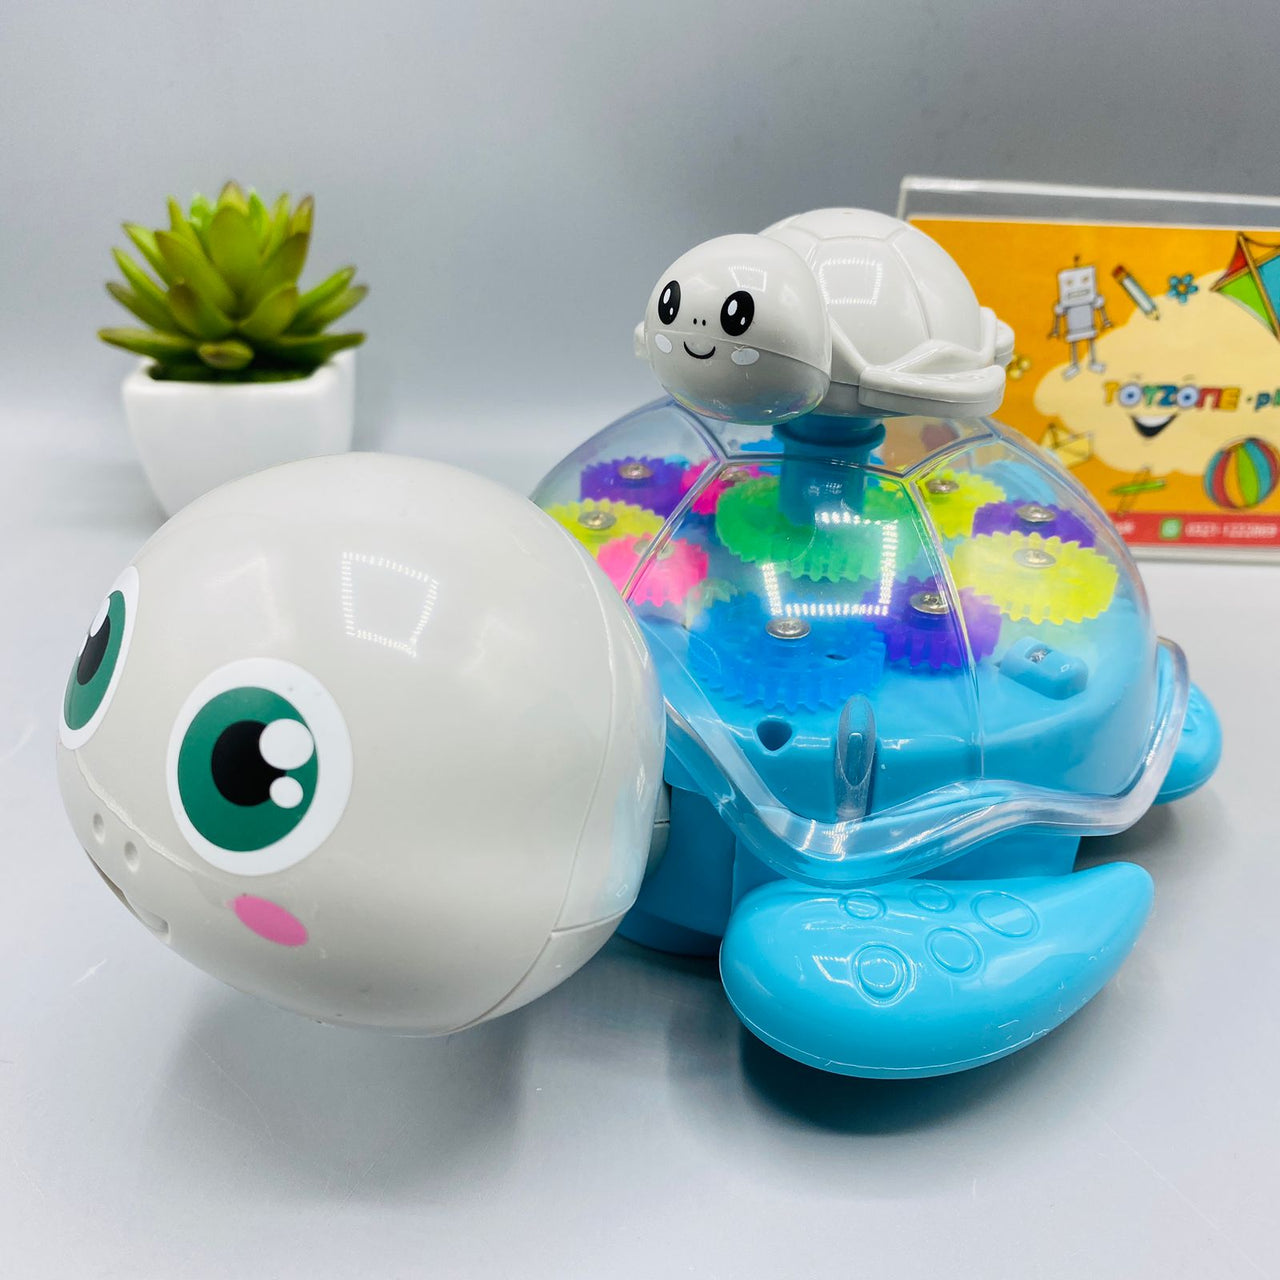 lucency gear turtle with light and sound